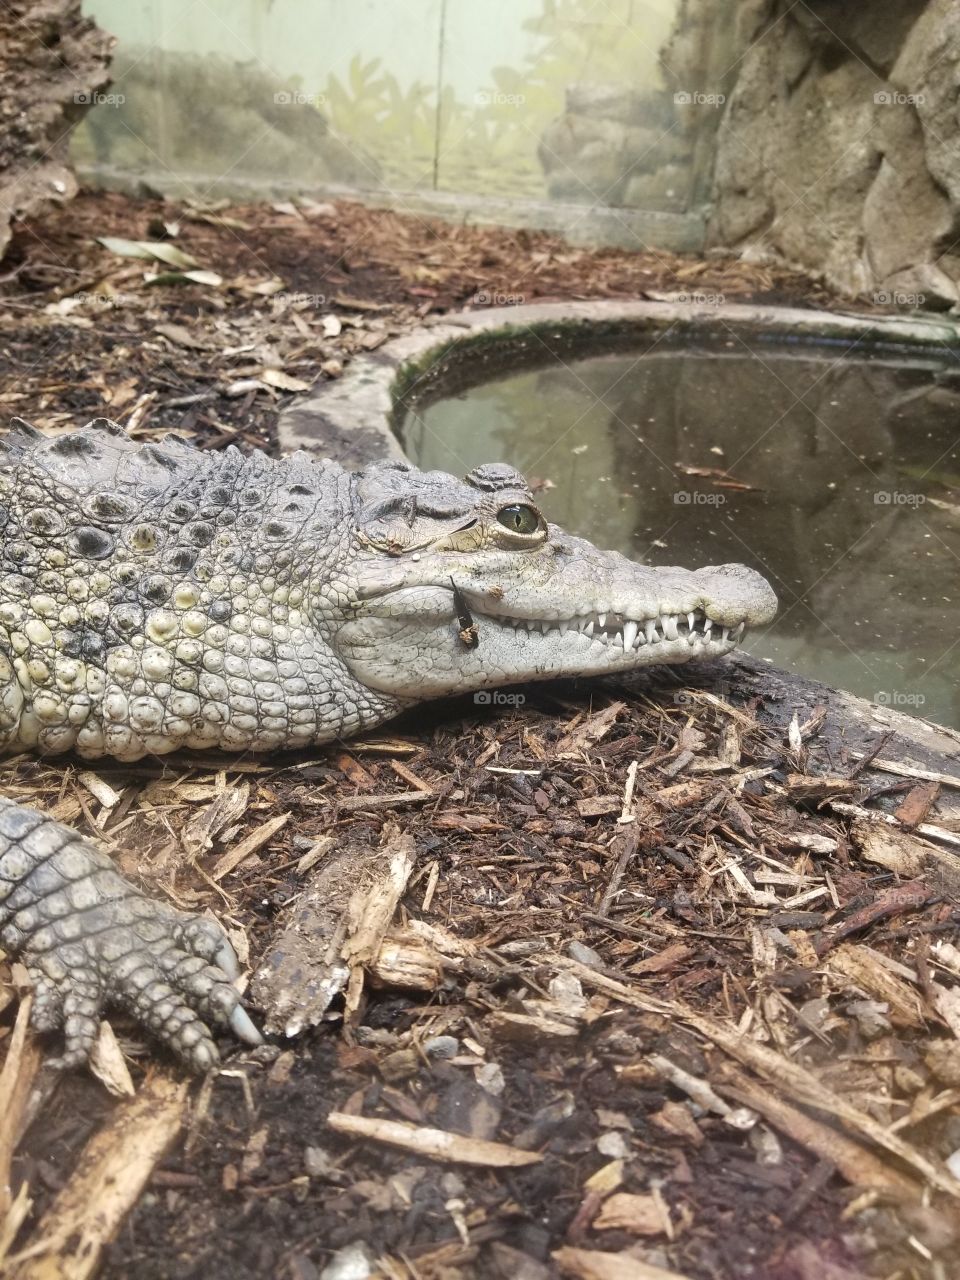 a philippino crocodile at the national zoo. smaller than I expected, but still big enough to do damage